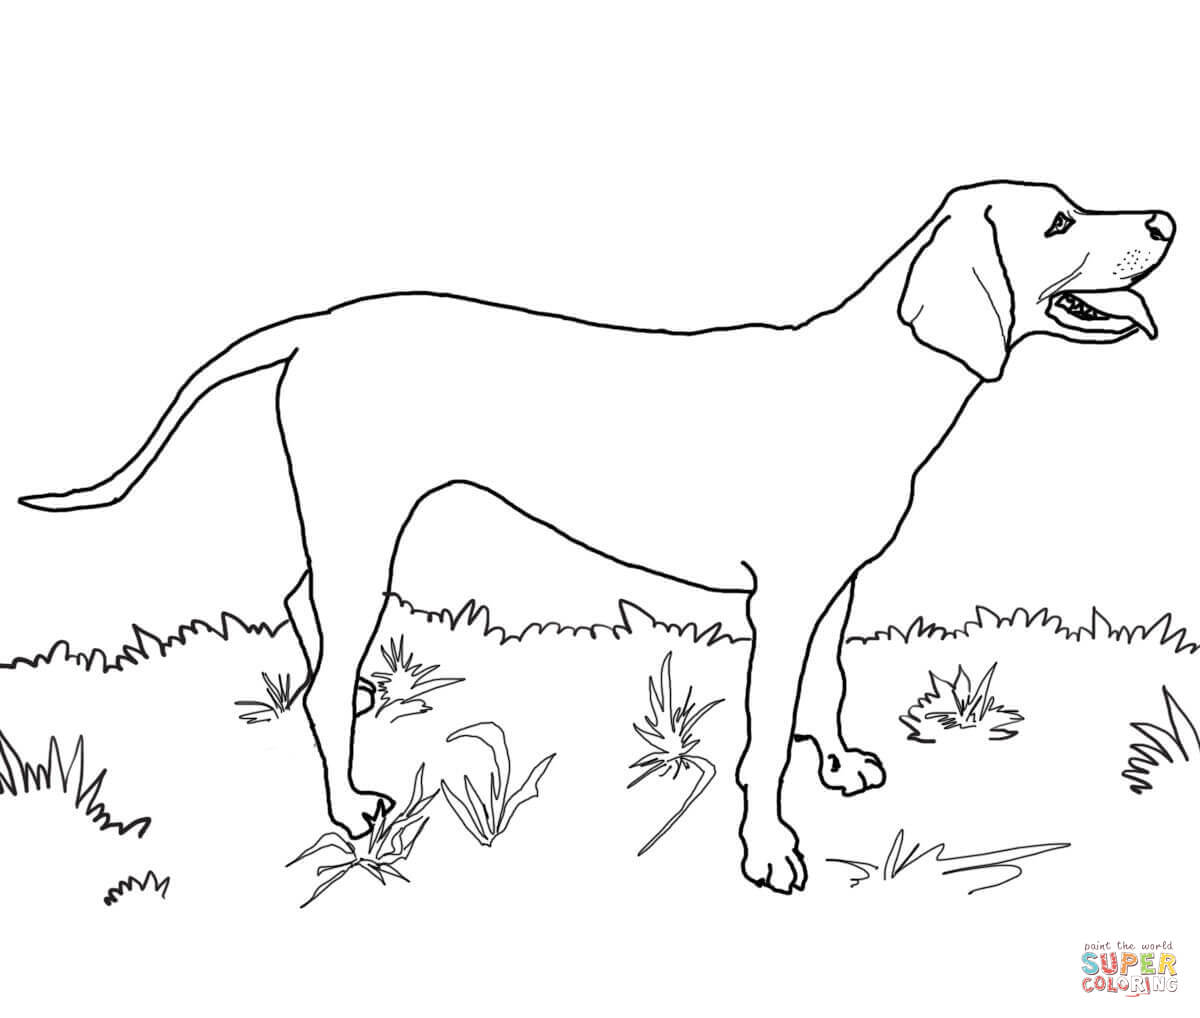 Dalmatian coloring page | Free Printable Coloring Pages